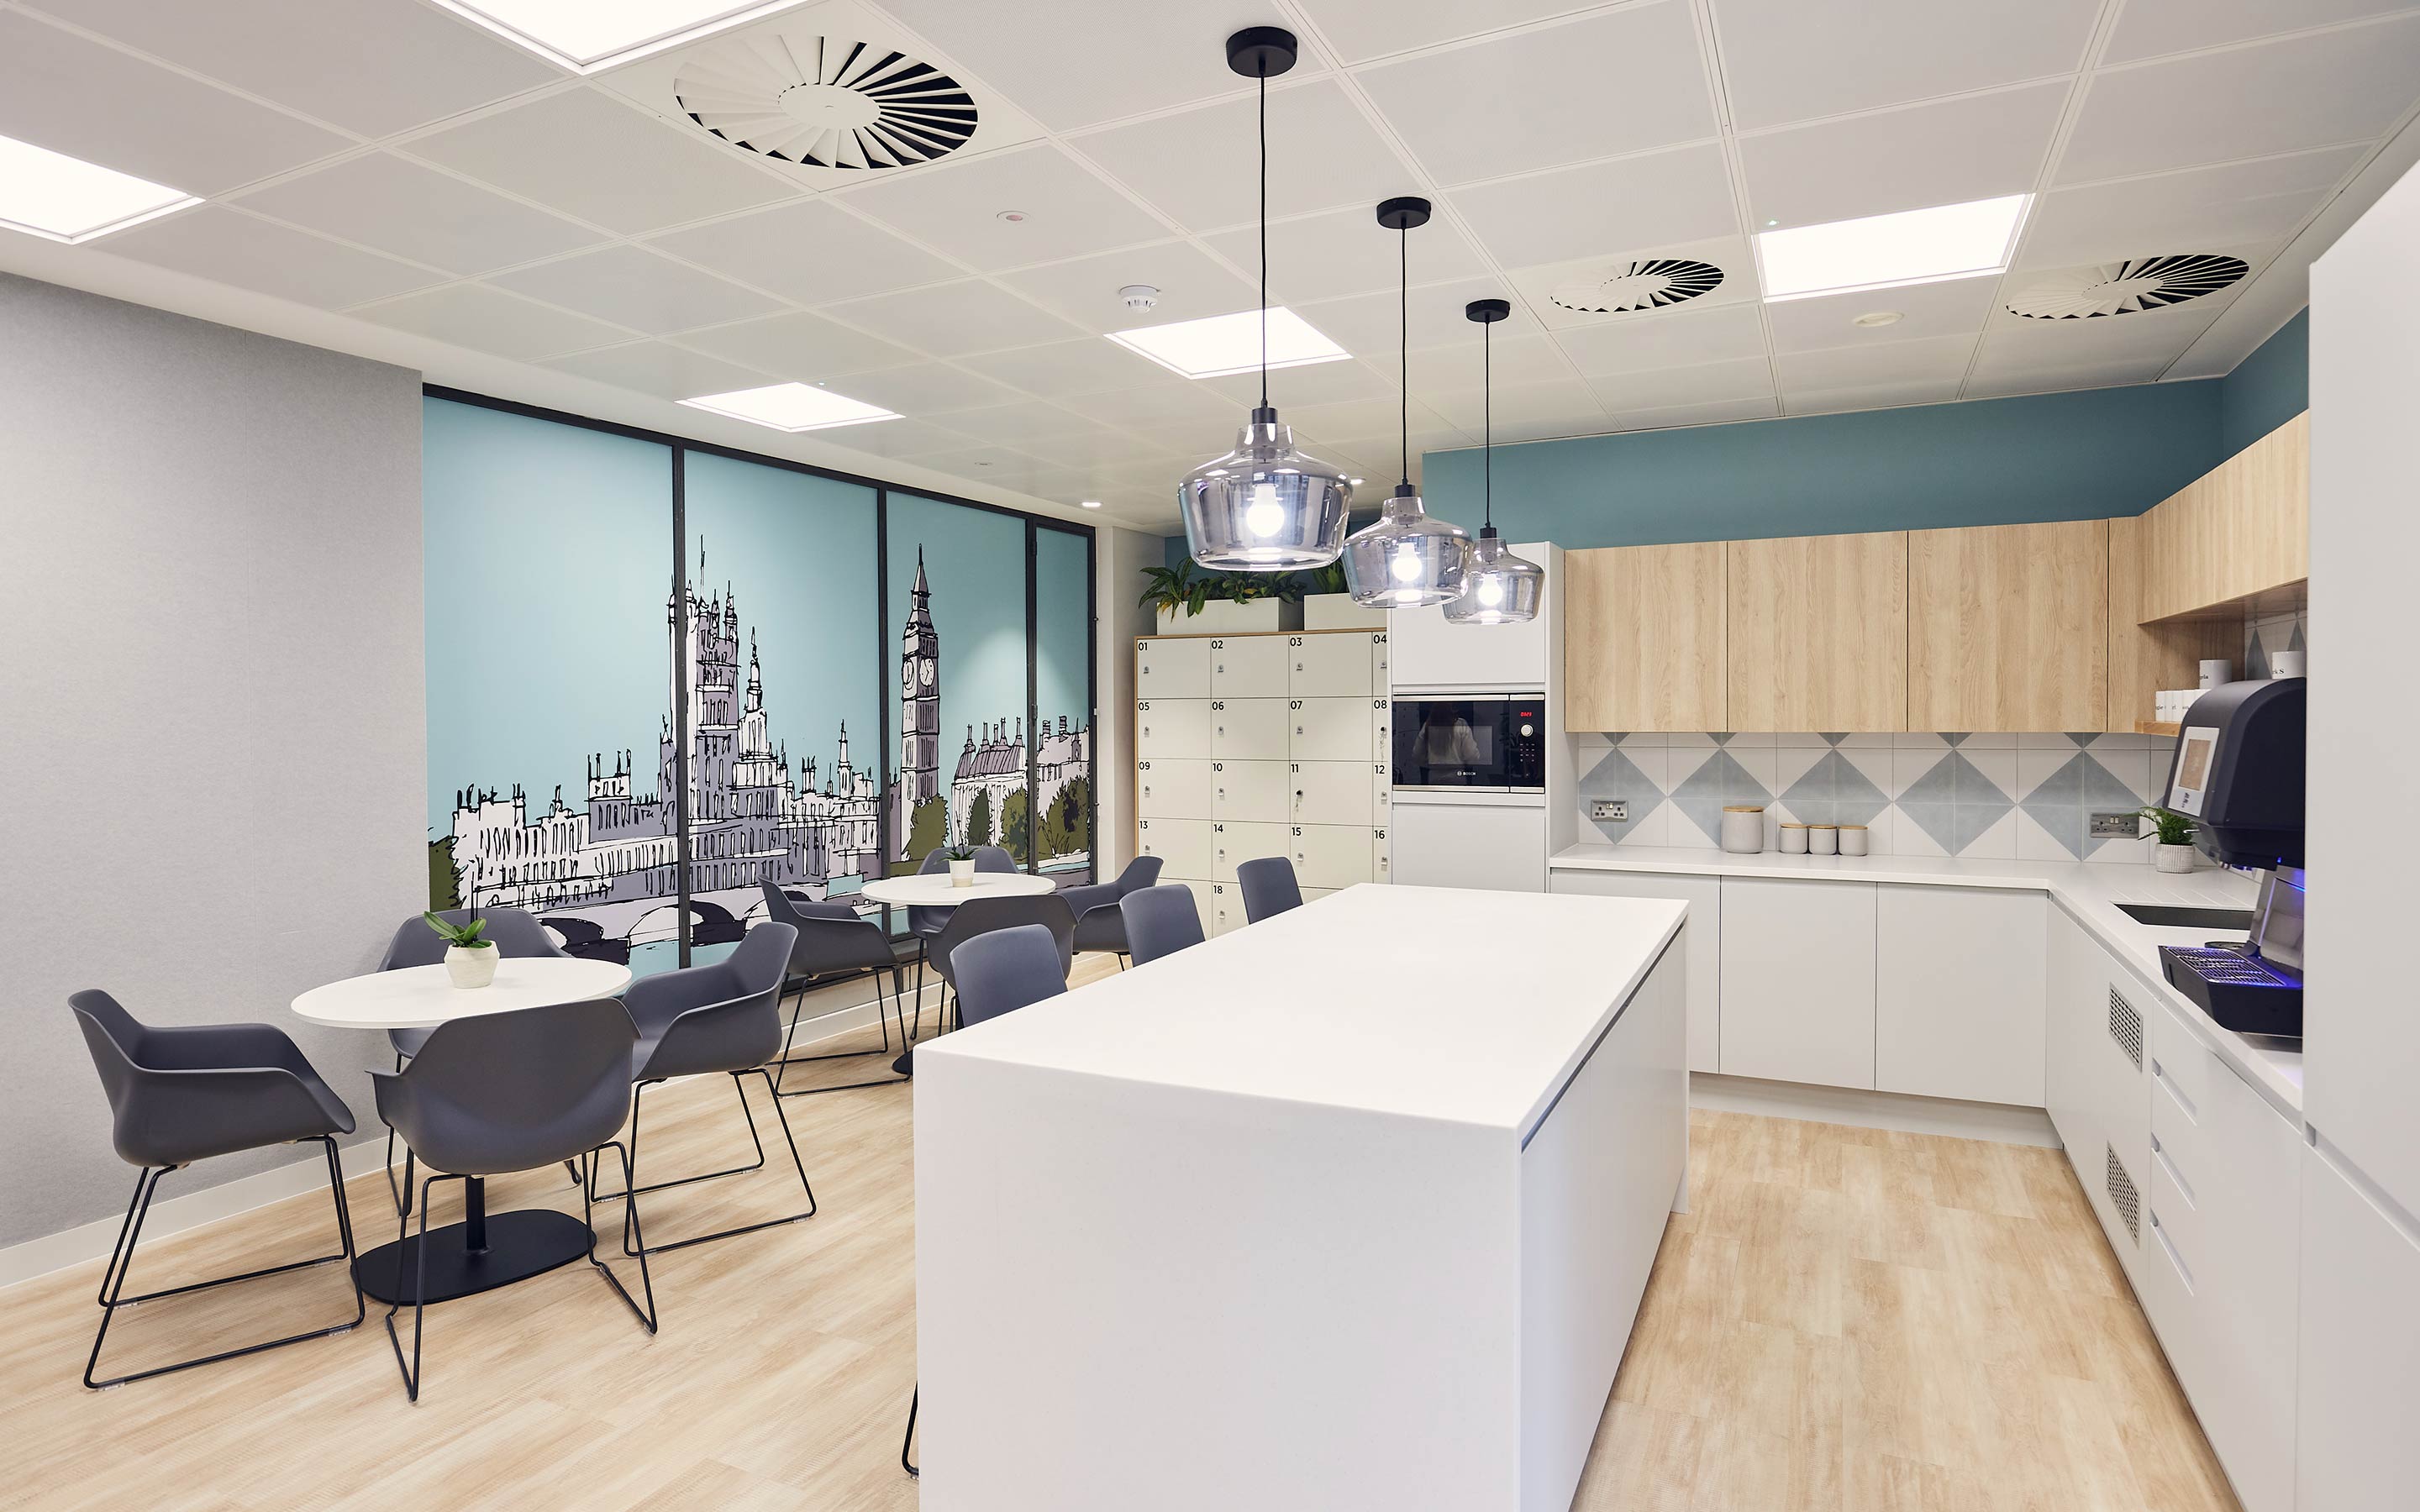 The image shows a bright, modern office tea point with kitchen facilities, and multiple seating options